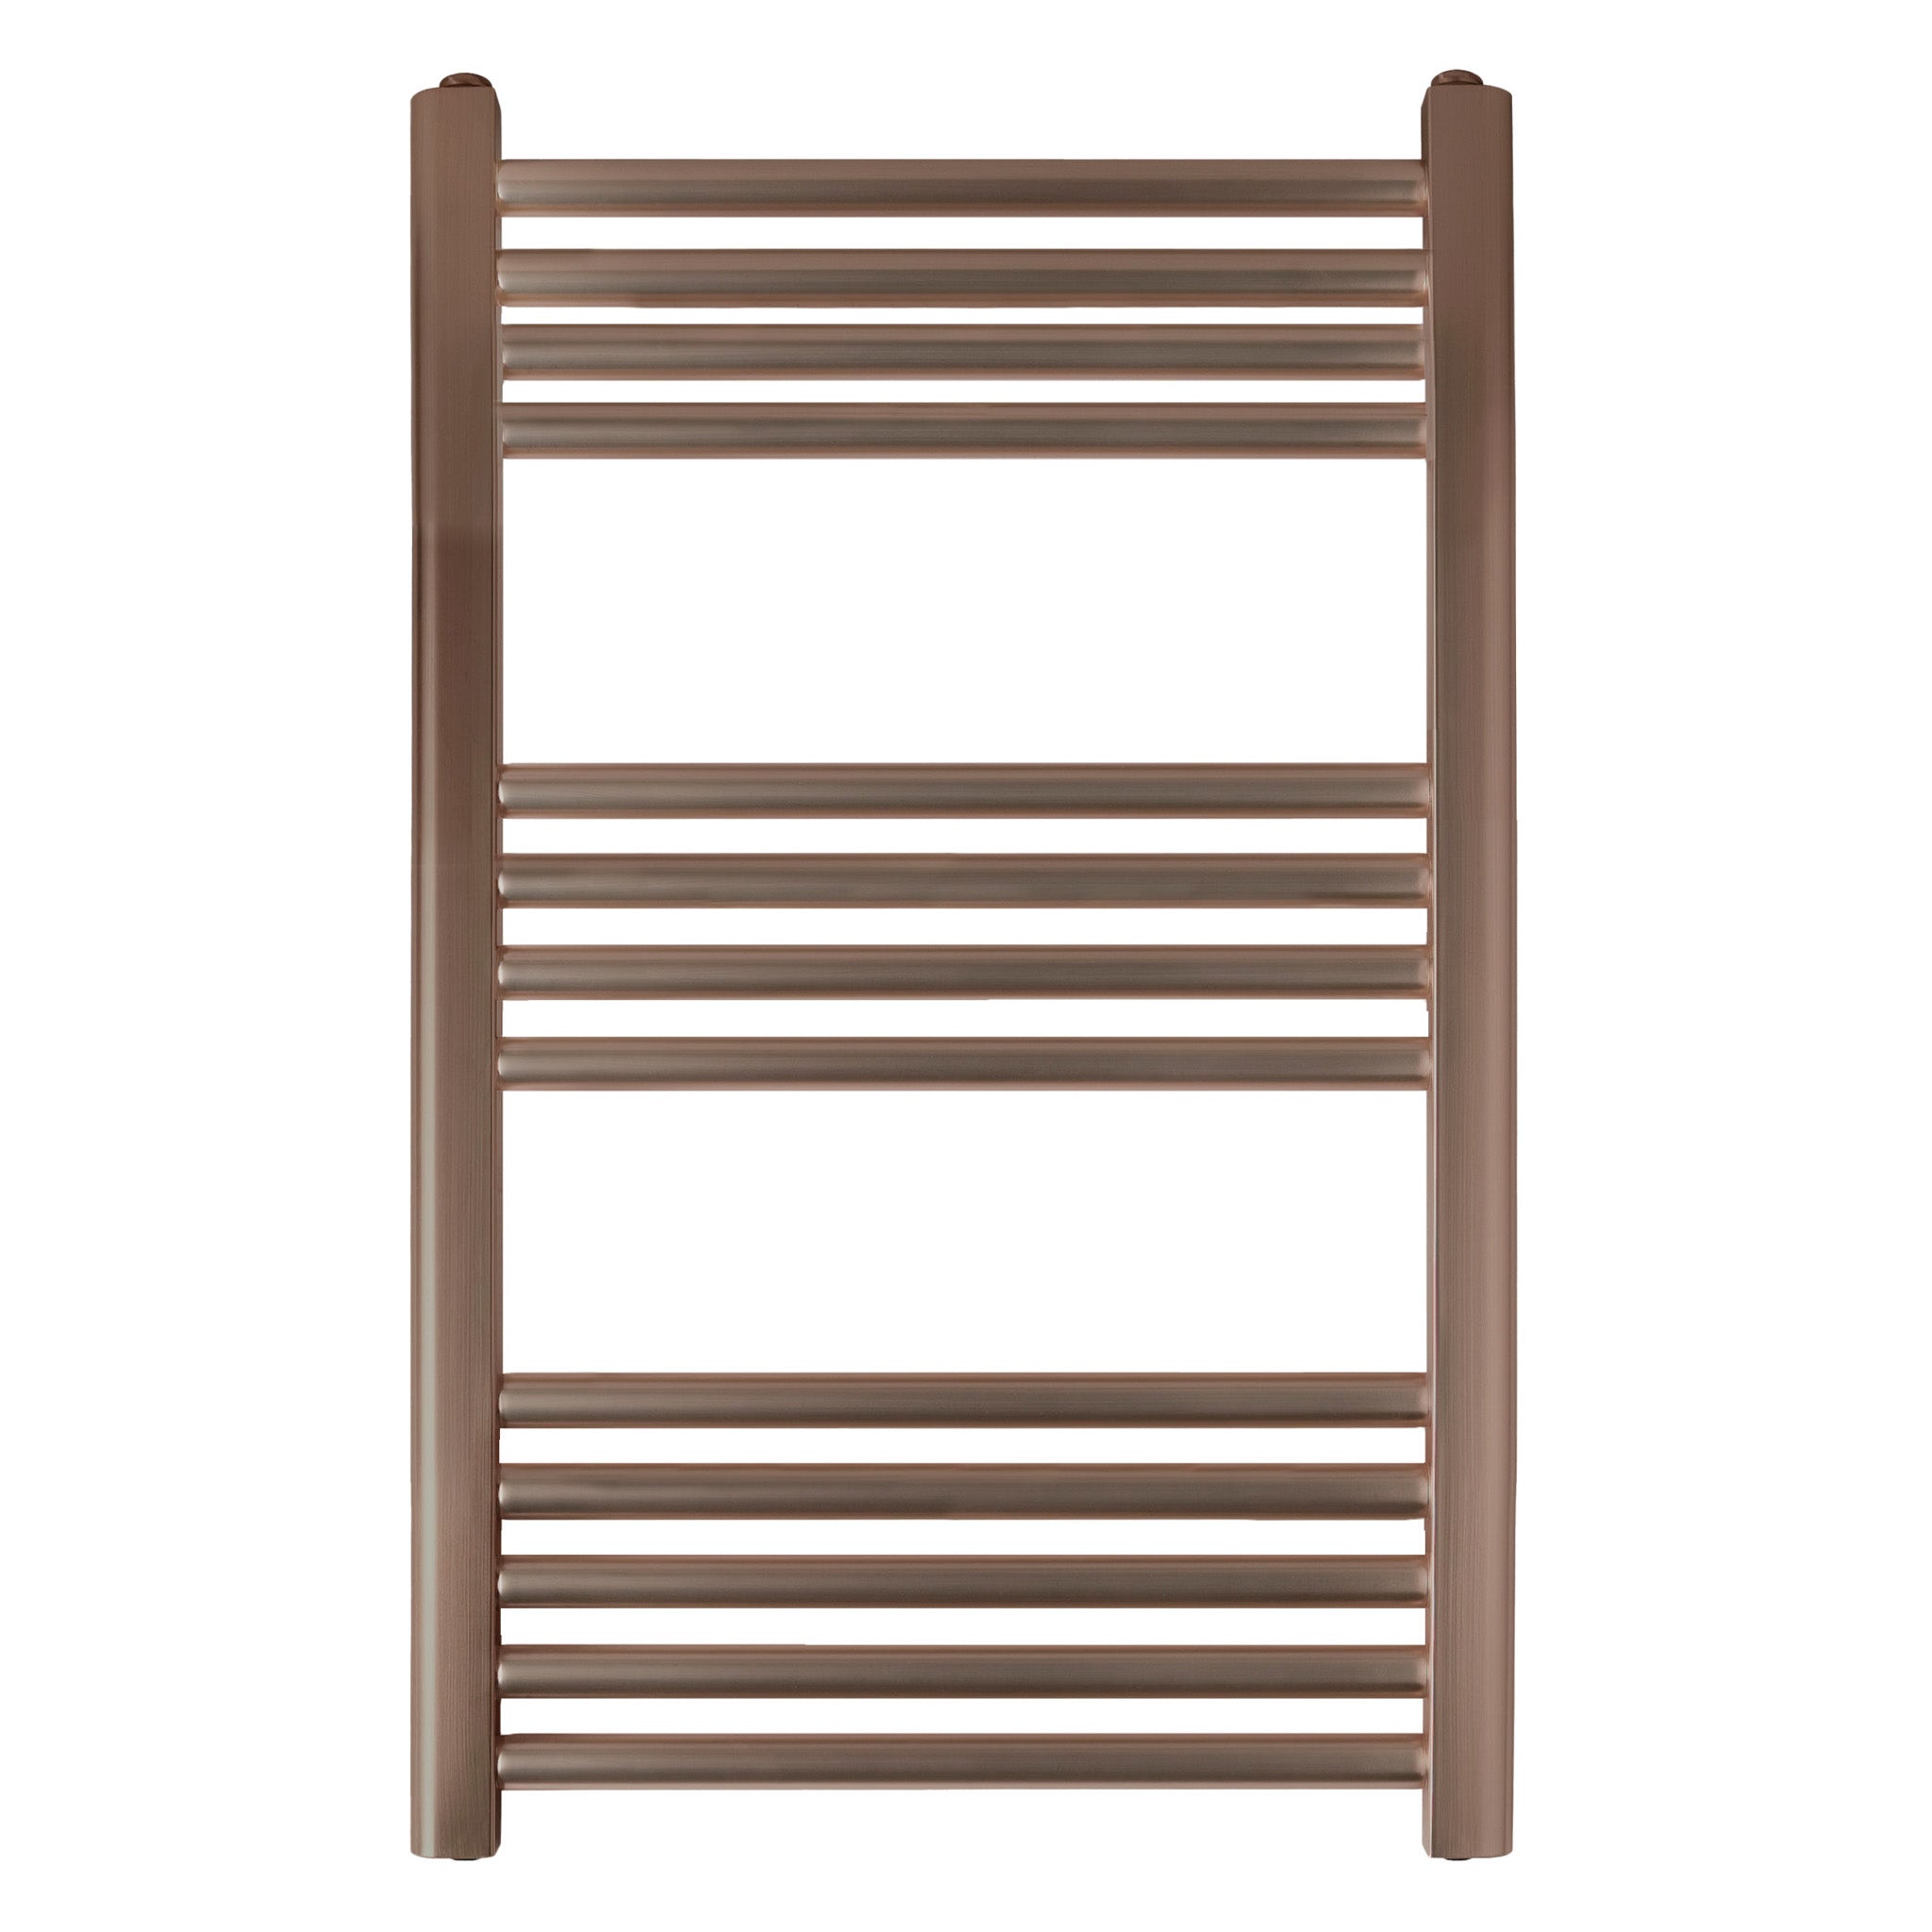 JTP VOS Wall Mounted Heated Towel Rail